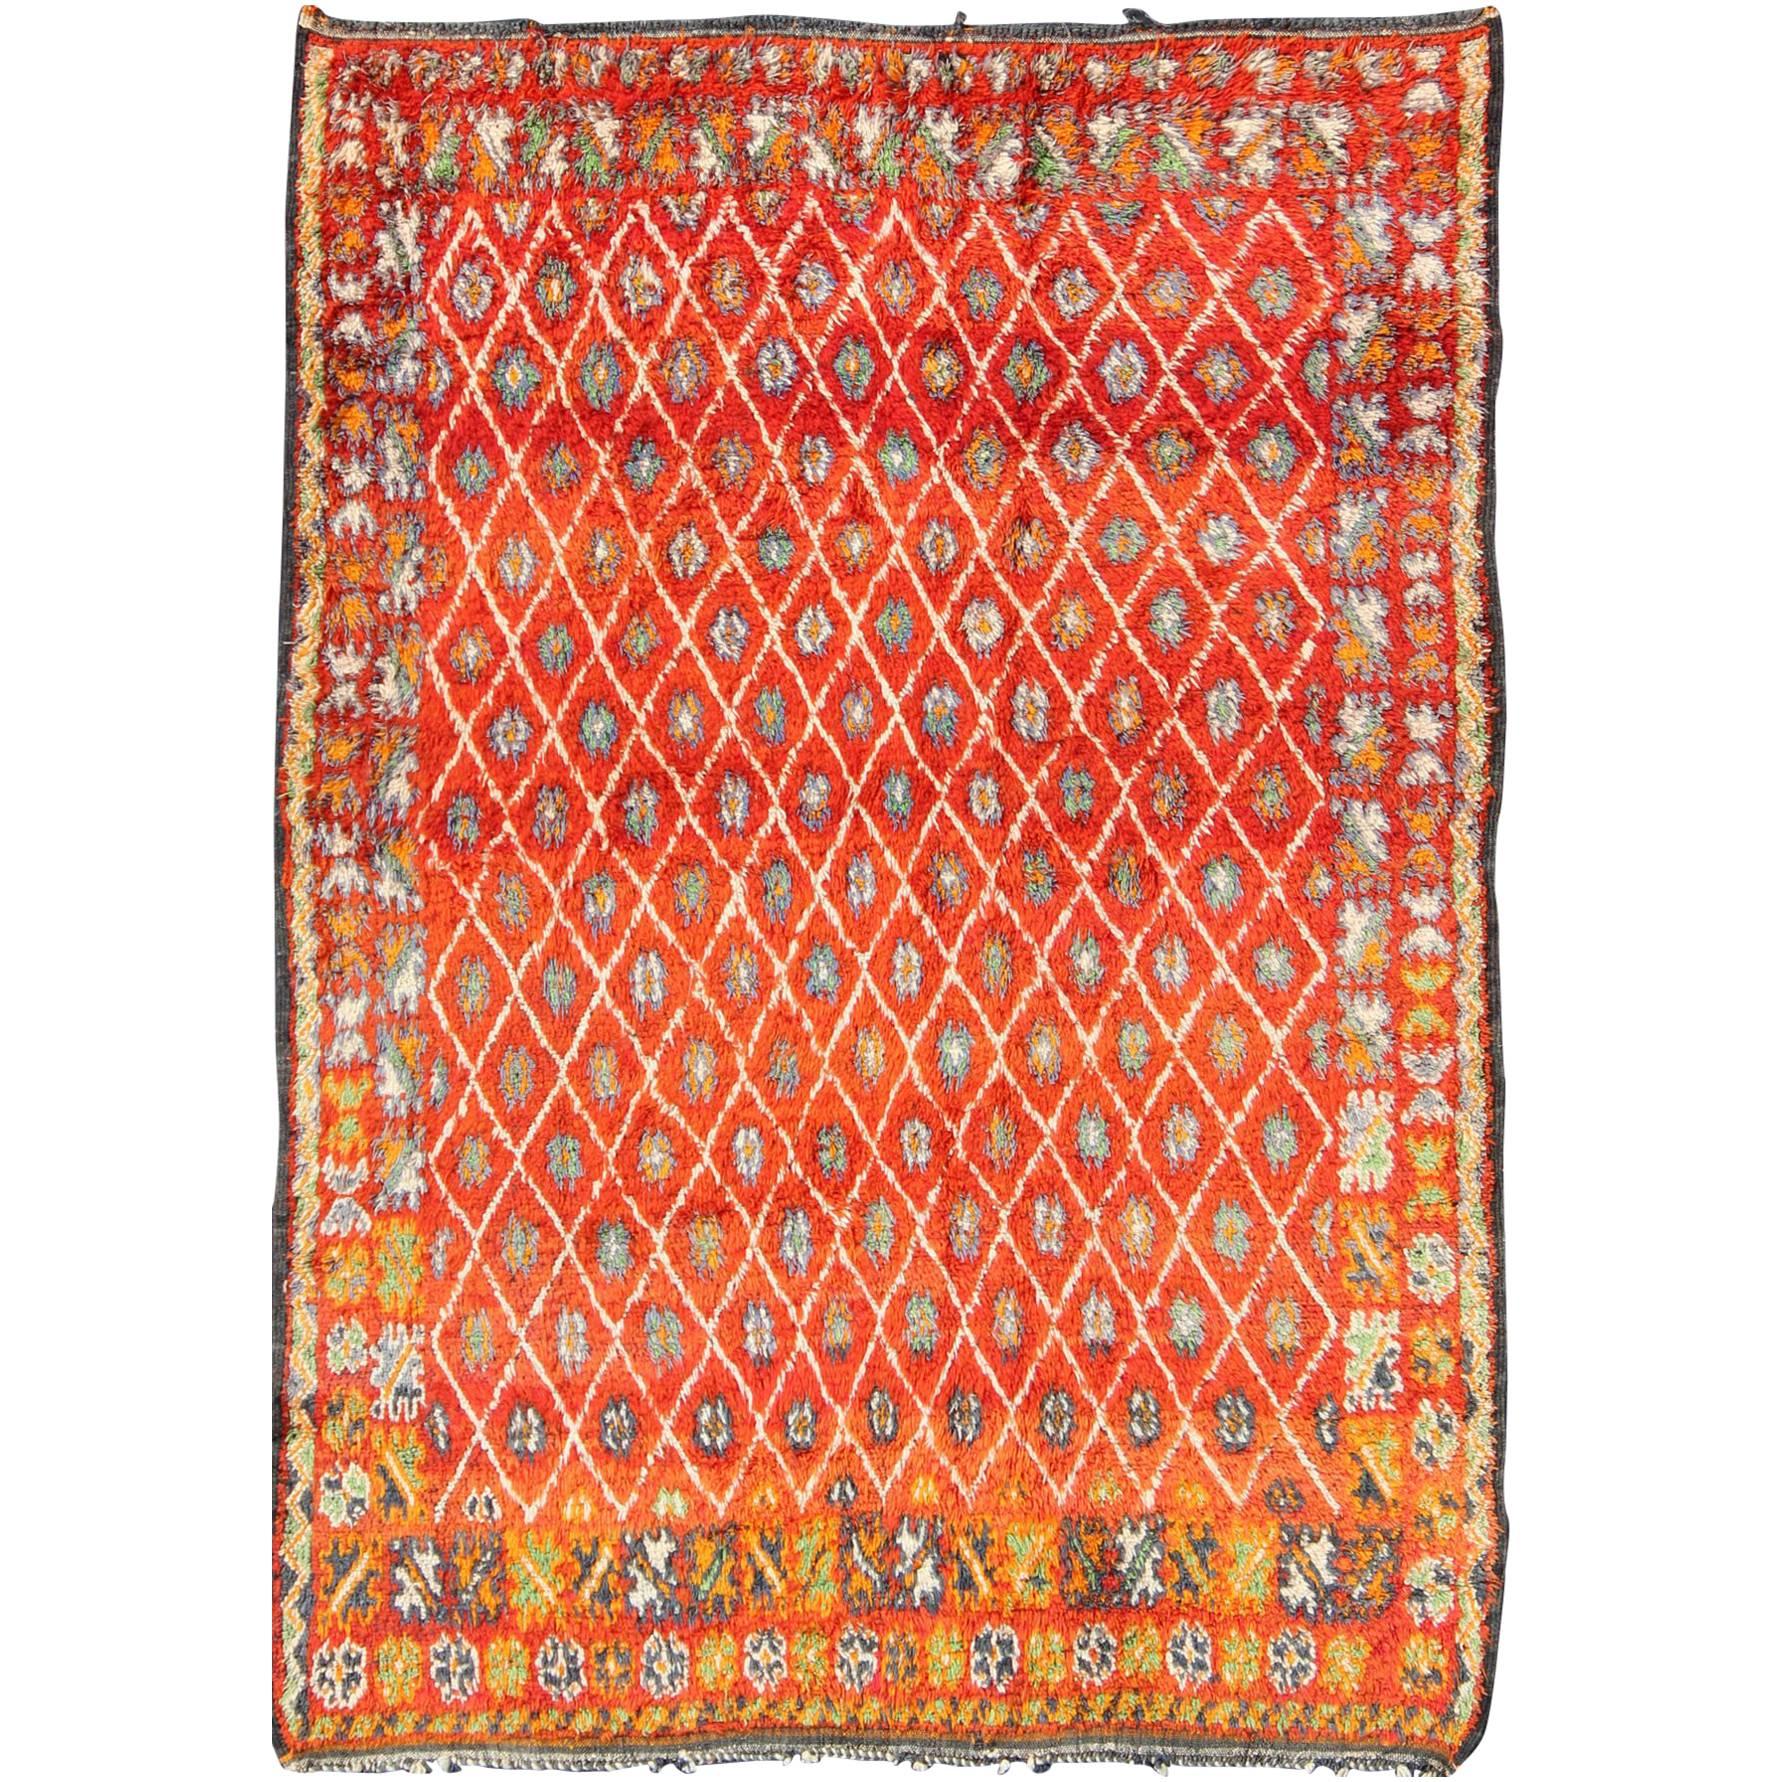 Orange and Red Background Vintage Moroccan Rug with All-Over Diamond Pattern